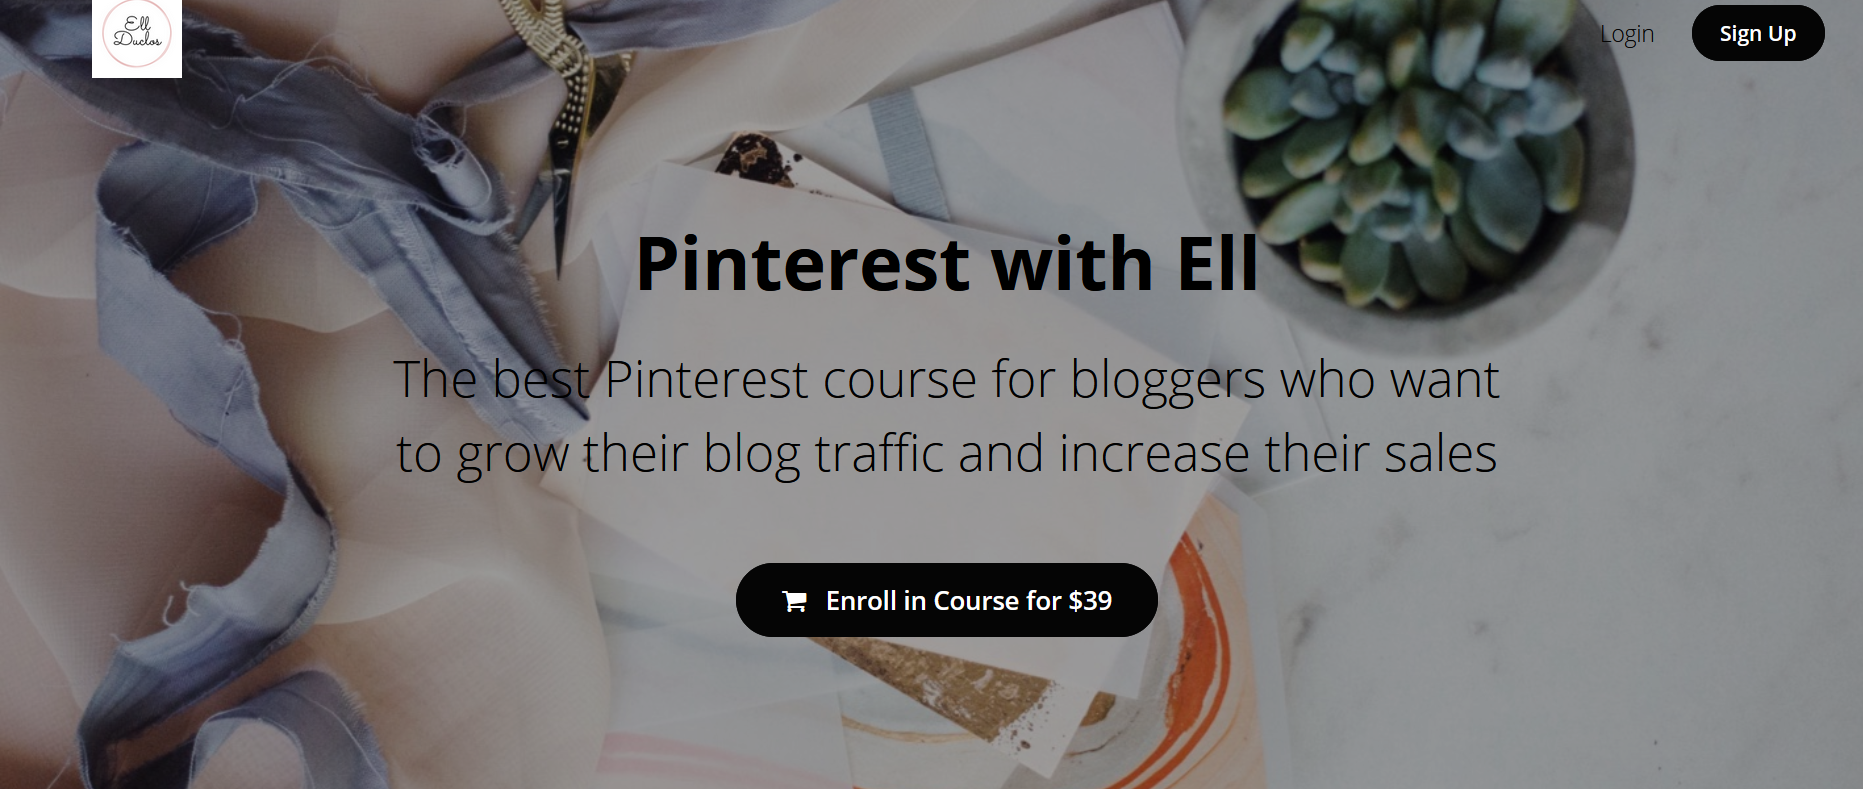 Pinterest with Ell course